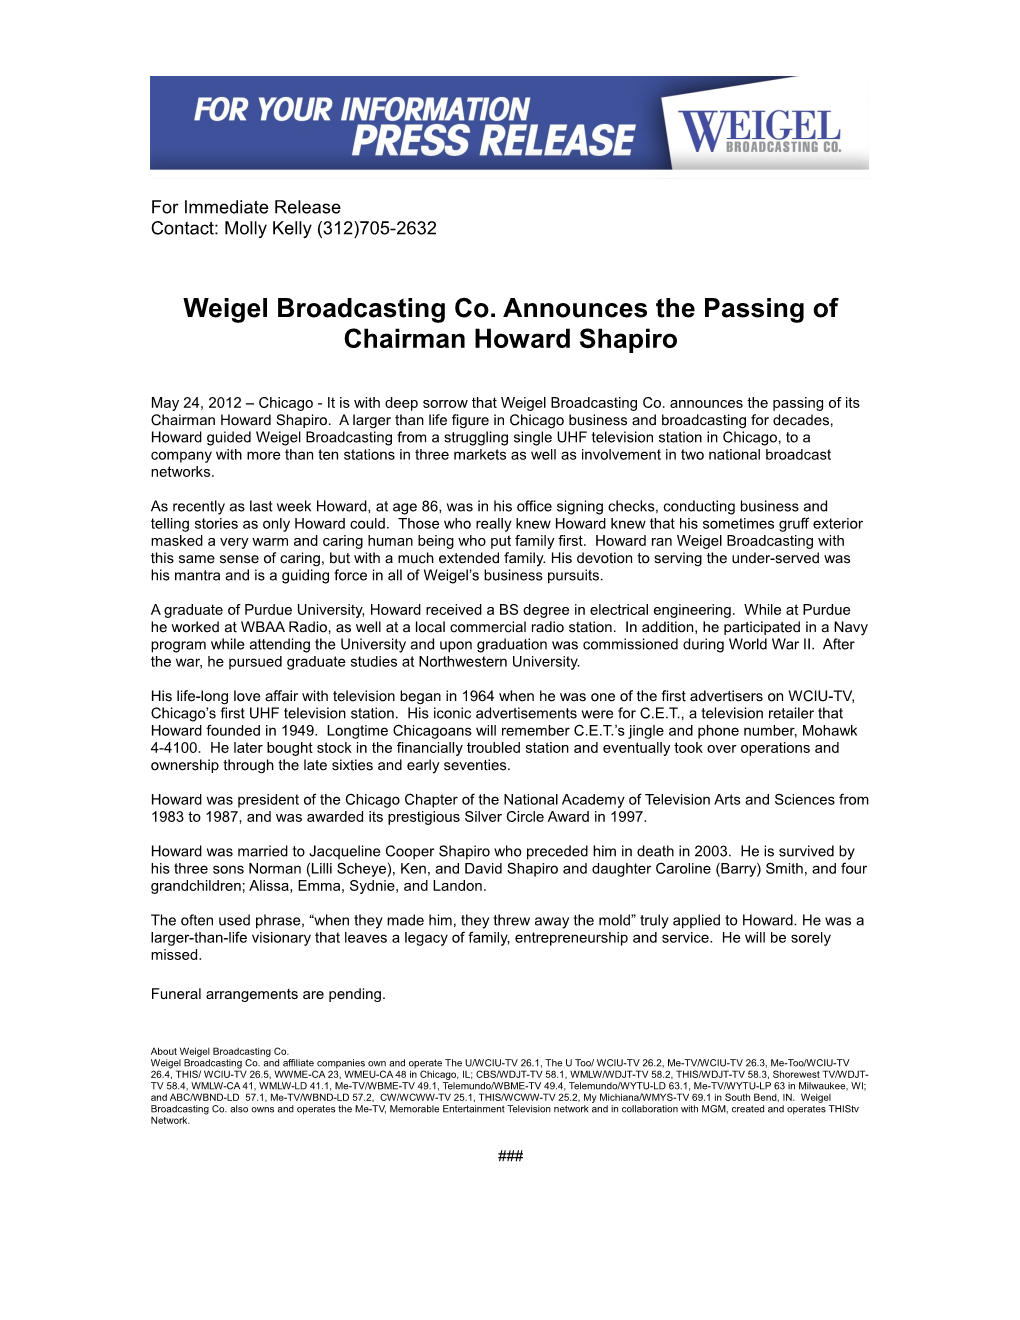 Weigel Broadcasting Co. Announces the Passing of Chairman Howard Shapiro